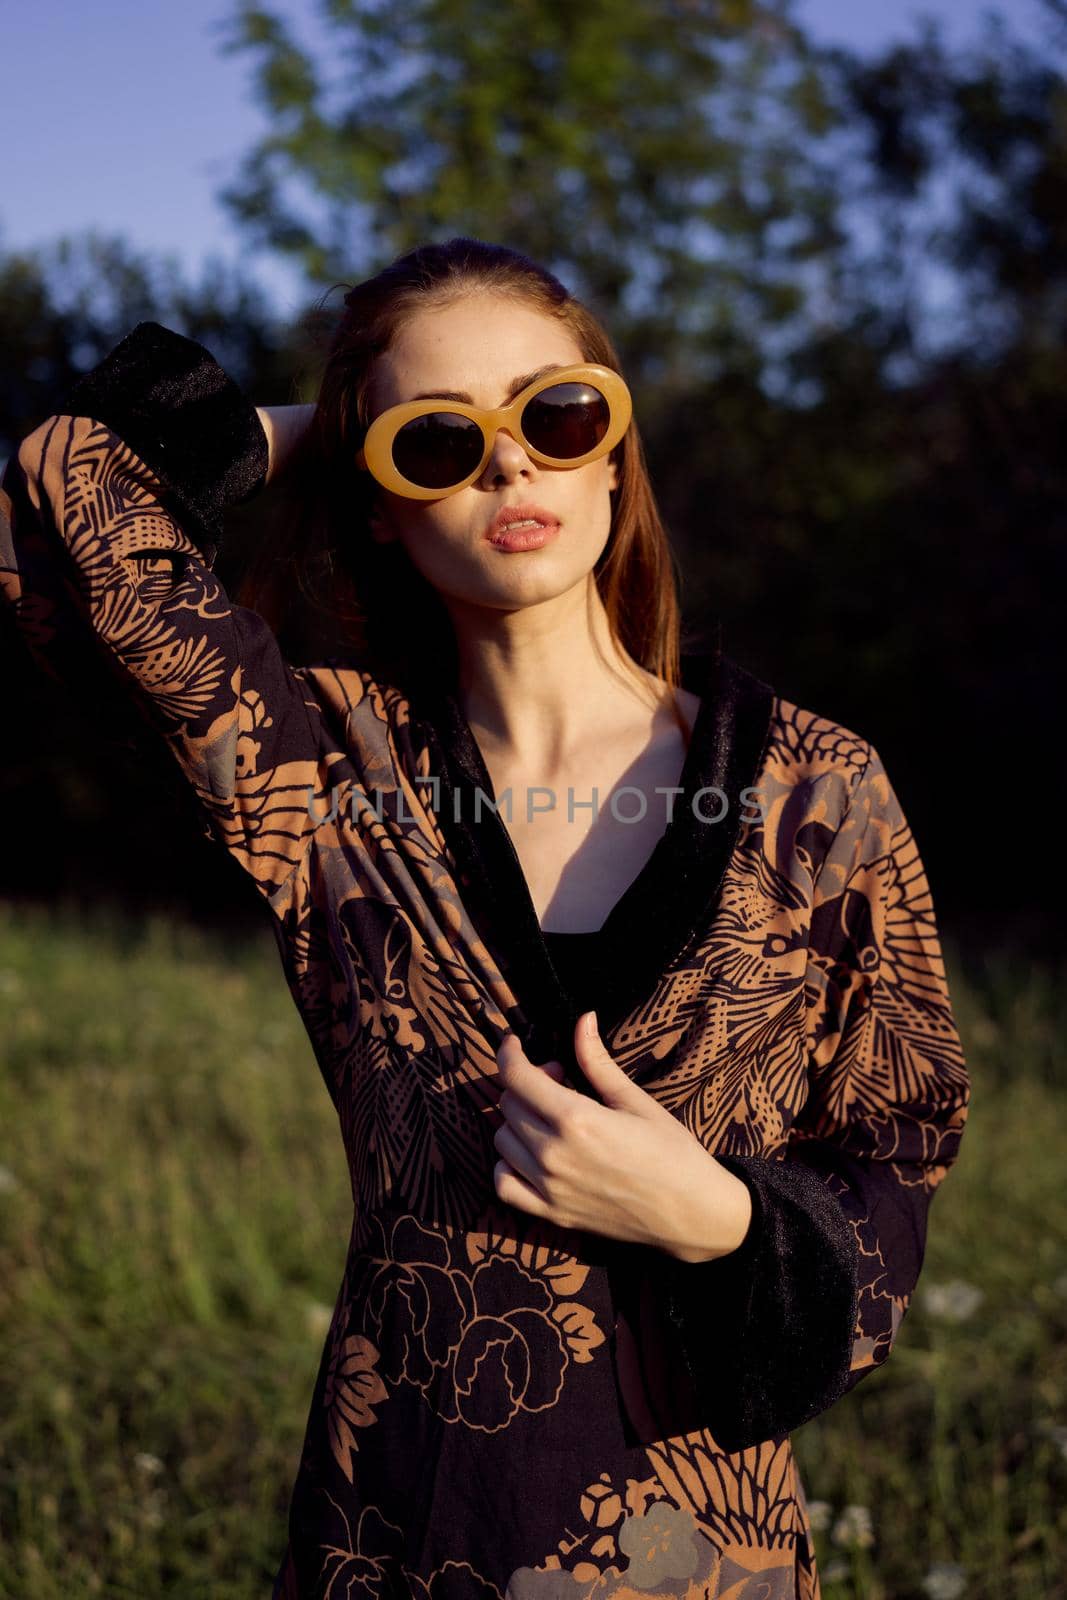 fashionable woman in sunglasses outdoors summer glamor by Vichizh